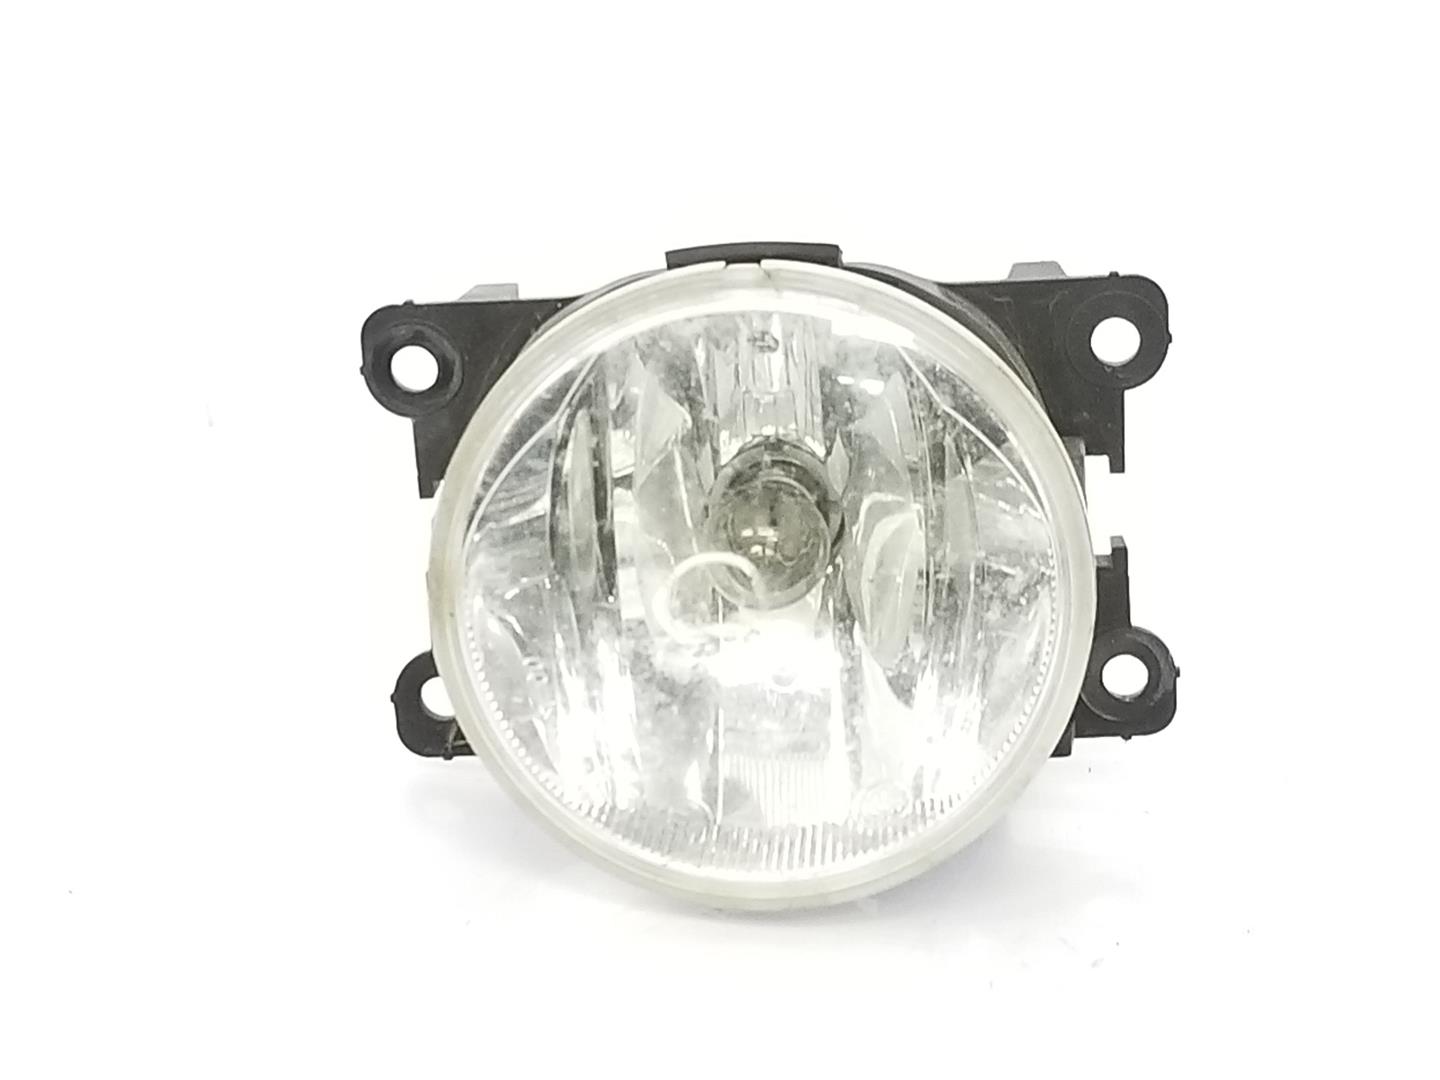 CITROËN C3 Picasso 1 generation (2008-2016) Front Right Fog Light 6206N0, 6206N0 19780689